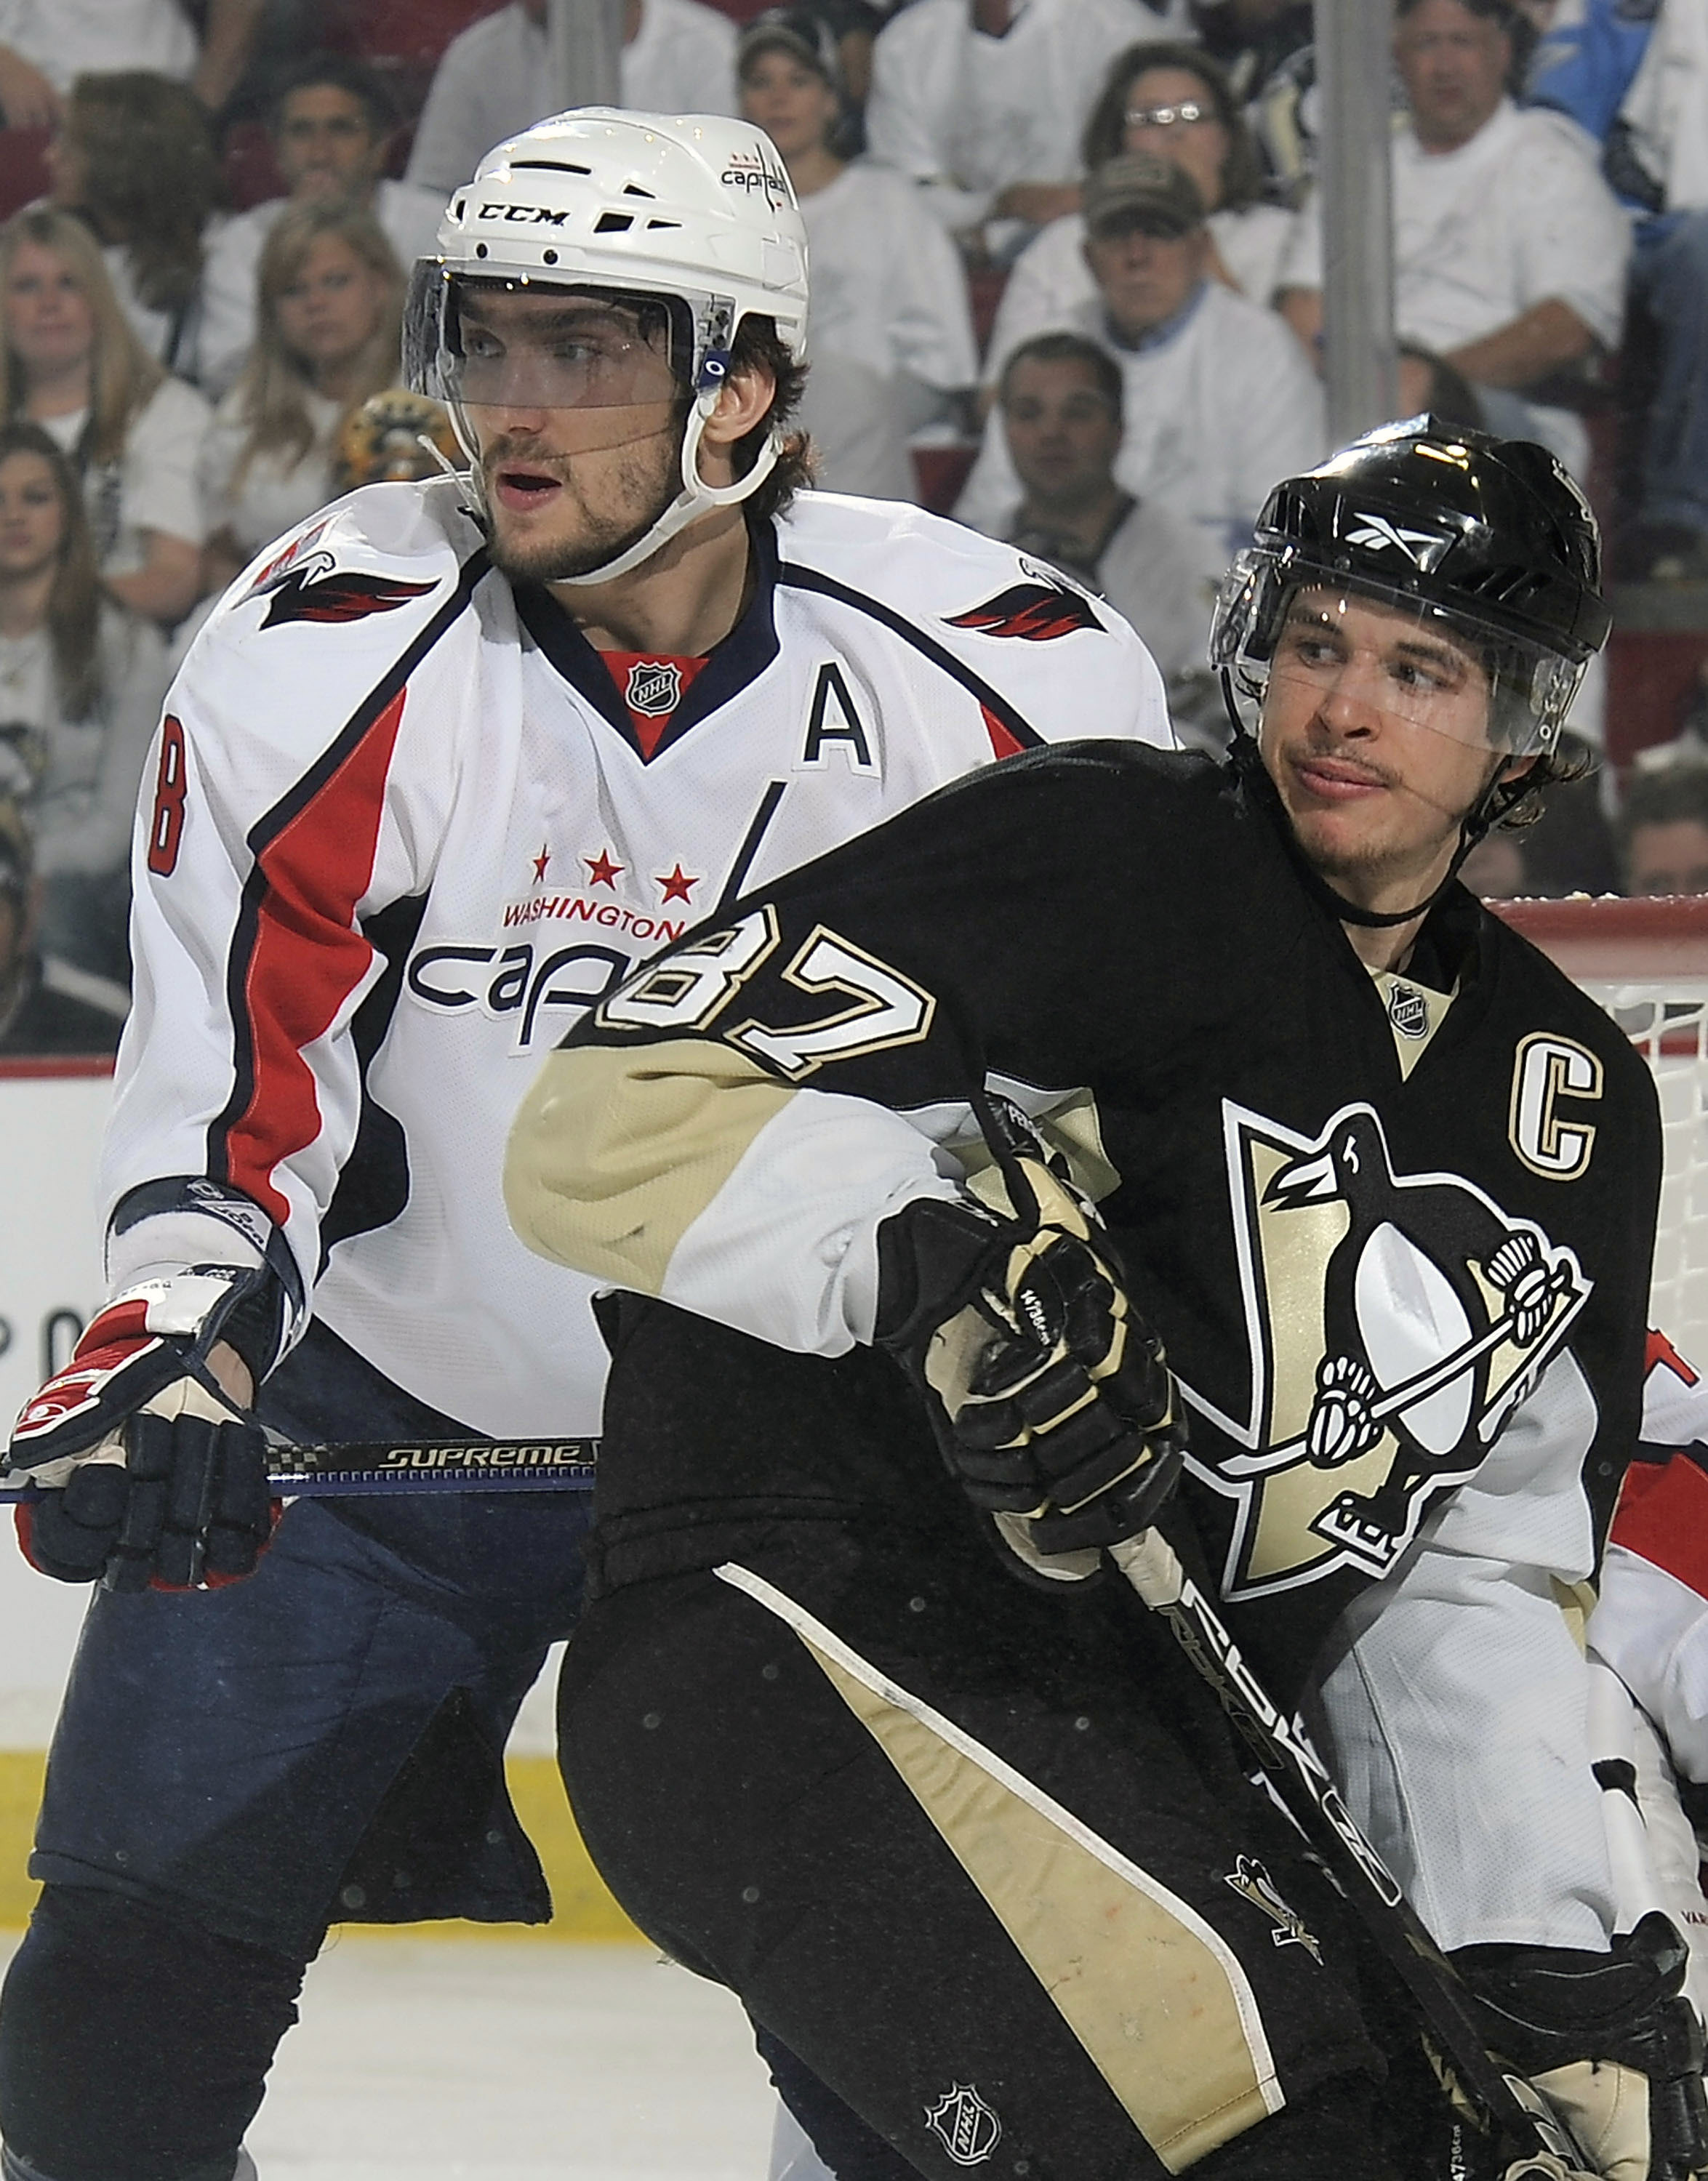 NHL foot pass: T.J. Oshie, Sidney Crosby others share advantageous